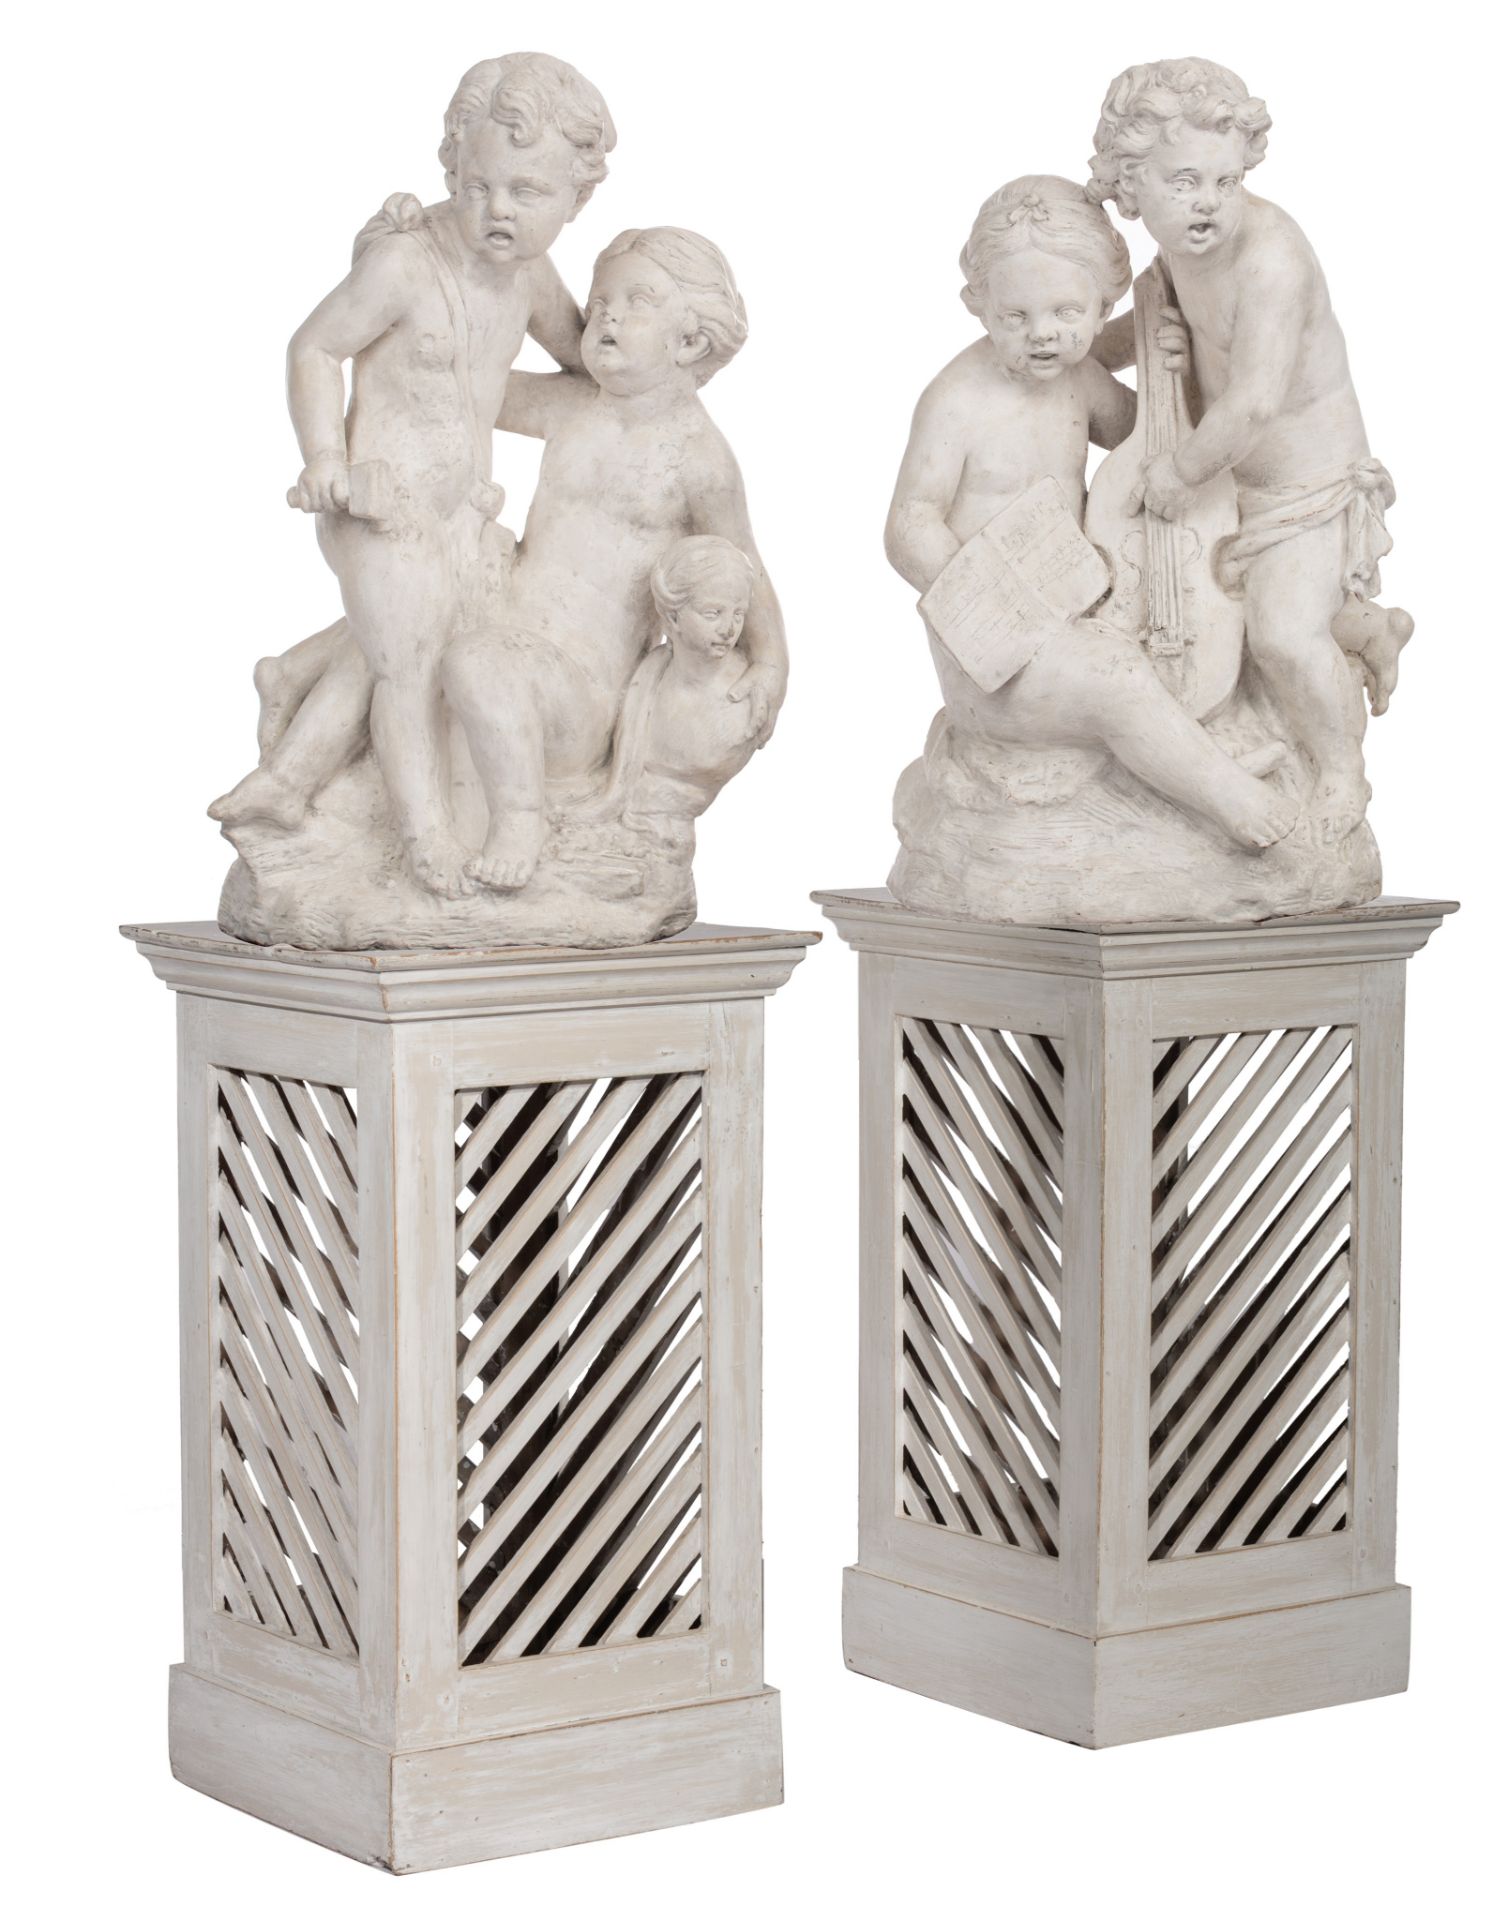 Two white painted terracotta sculptures, depicting an allegory on music and sculpture, 18thC, H 85 -